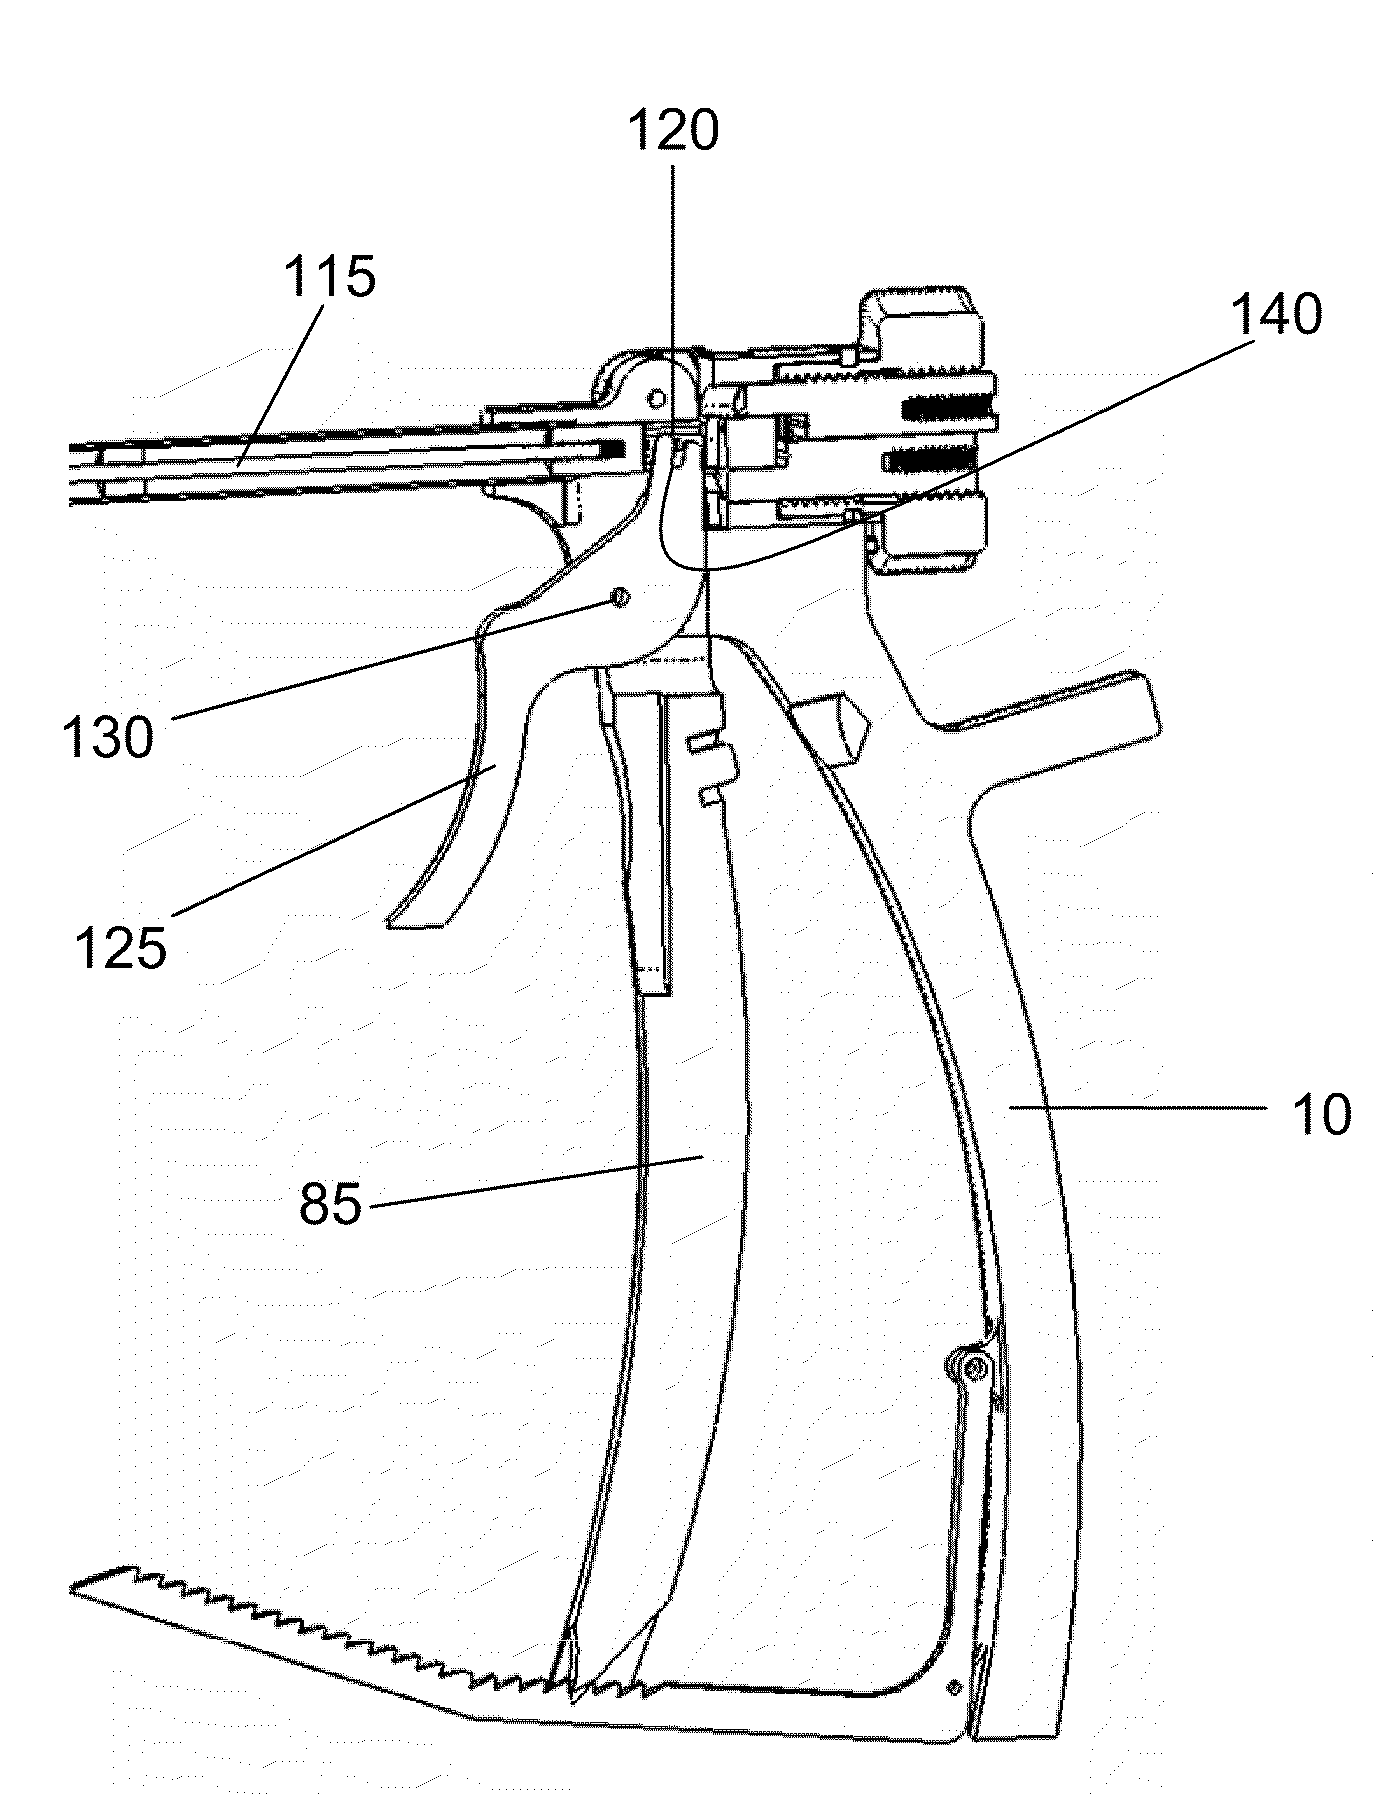 Method and apparatus for passing suture through the labrum of a hip joint in order to secure the labrum to the acetabulum